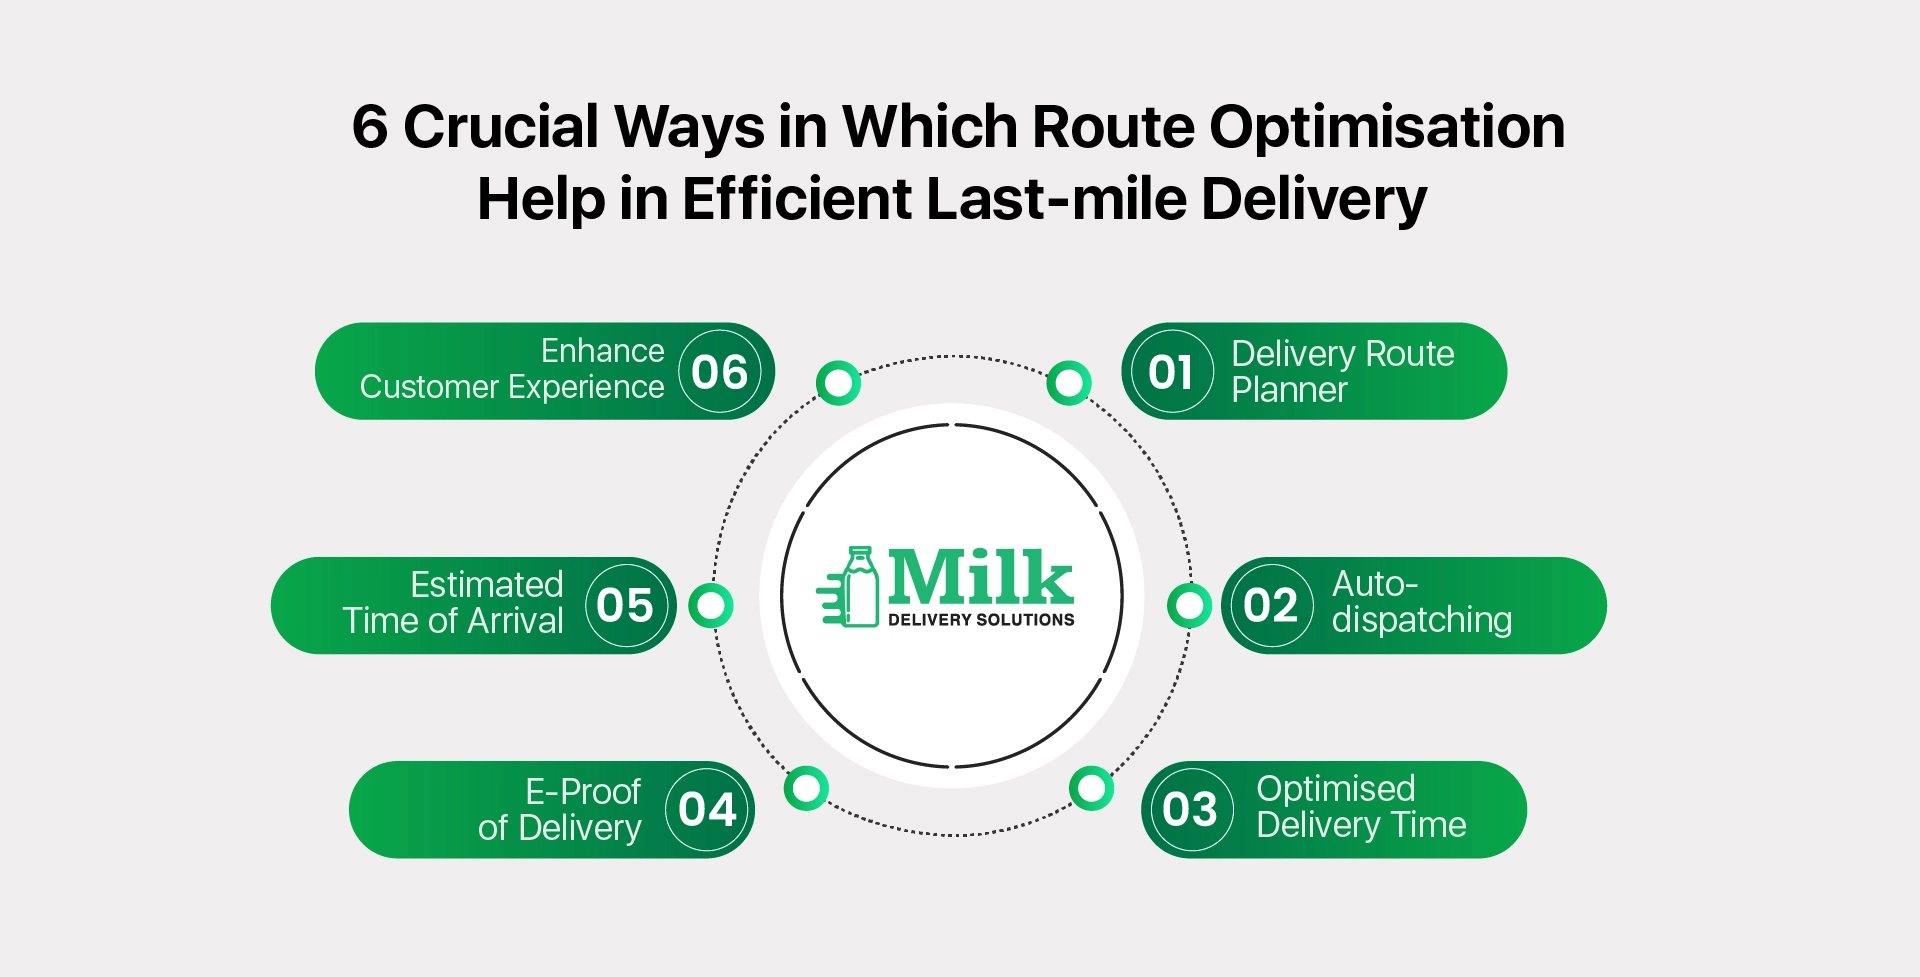 ravi garg, mds, ways, route-optimisation, last-mile delivery, delivery route planner, auto-dispatching, delivery time, customer experience, estimated time of arrival, e-proof of delivery